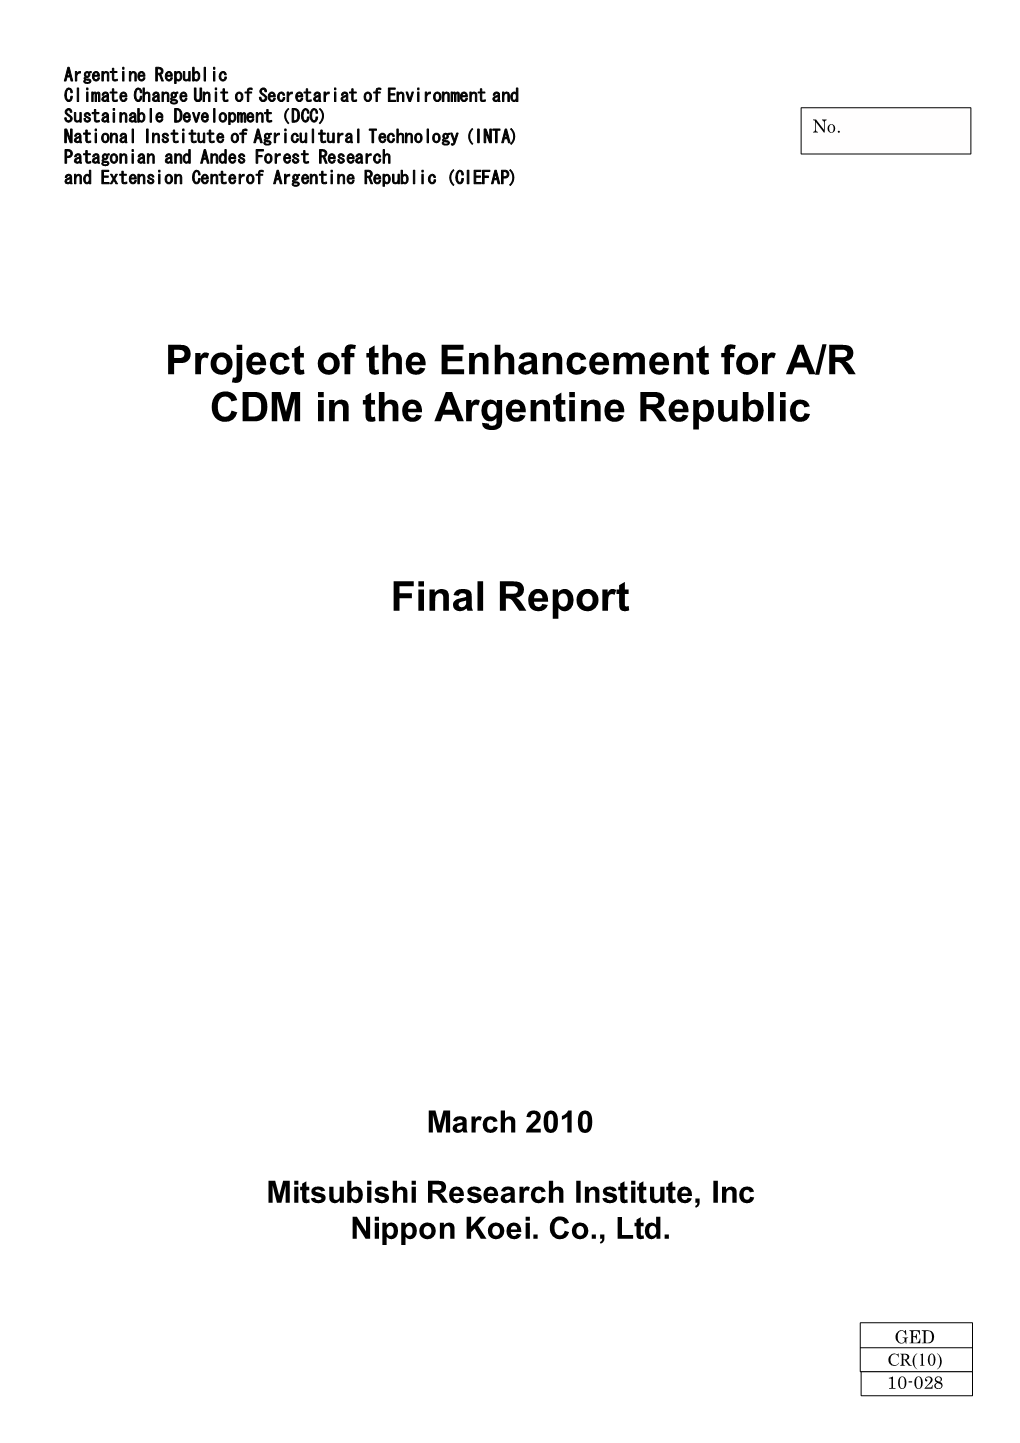 Project of the Enhancement for A/R CDM in the Argentine Republic